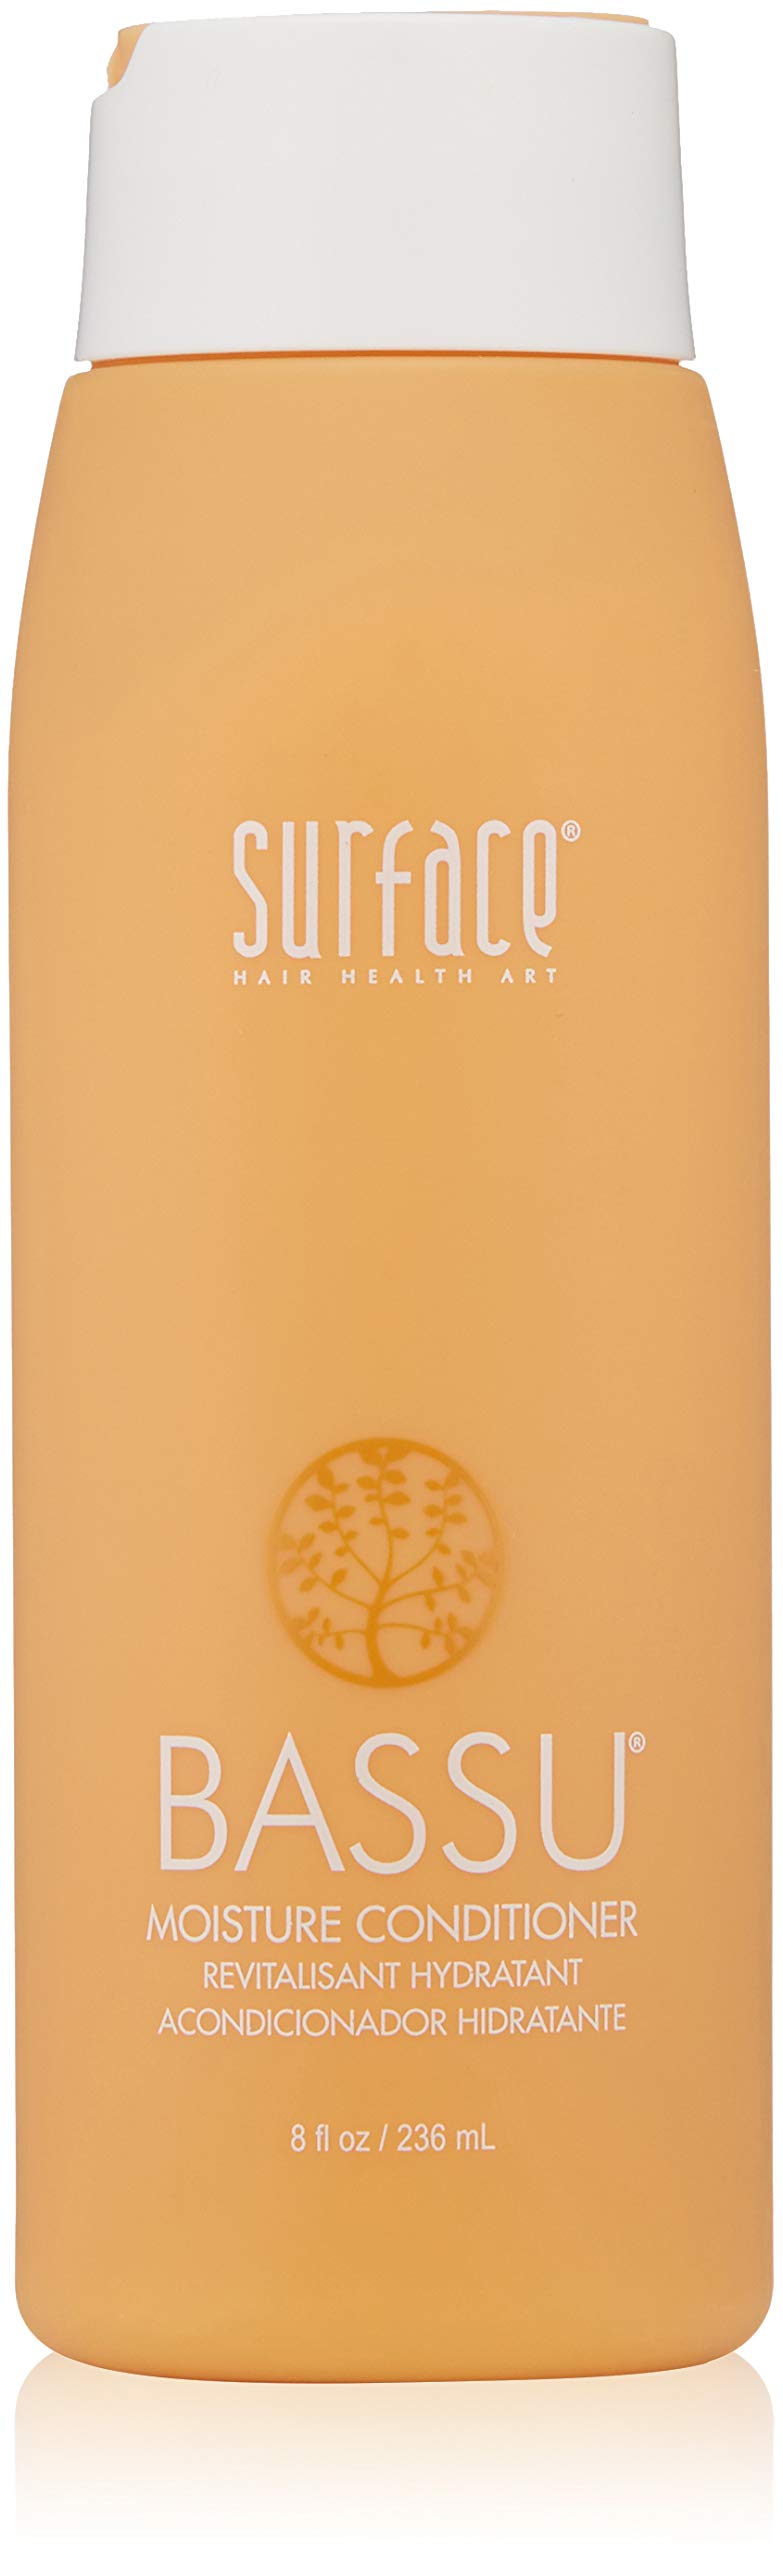 Surface Hair Bassu Moisture Conditioner, Vegan and Paraben Free Conditioning To Add Shine And Moisture, With Moringa and Babassu Oil